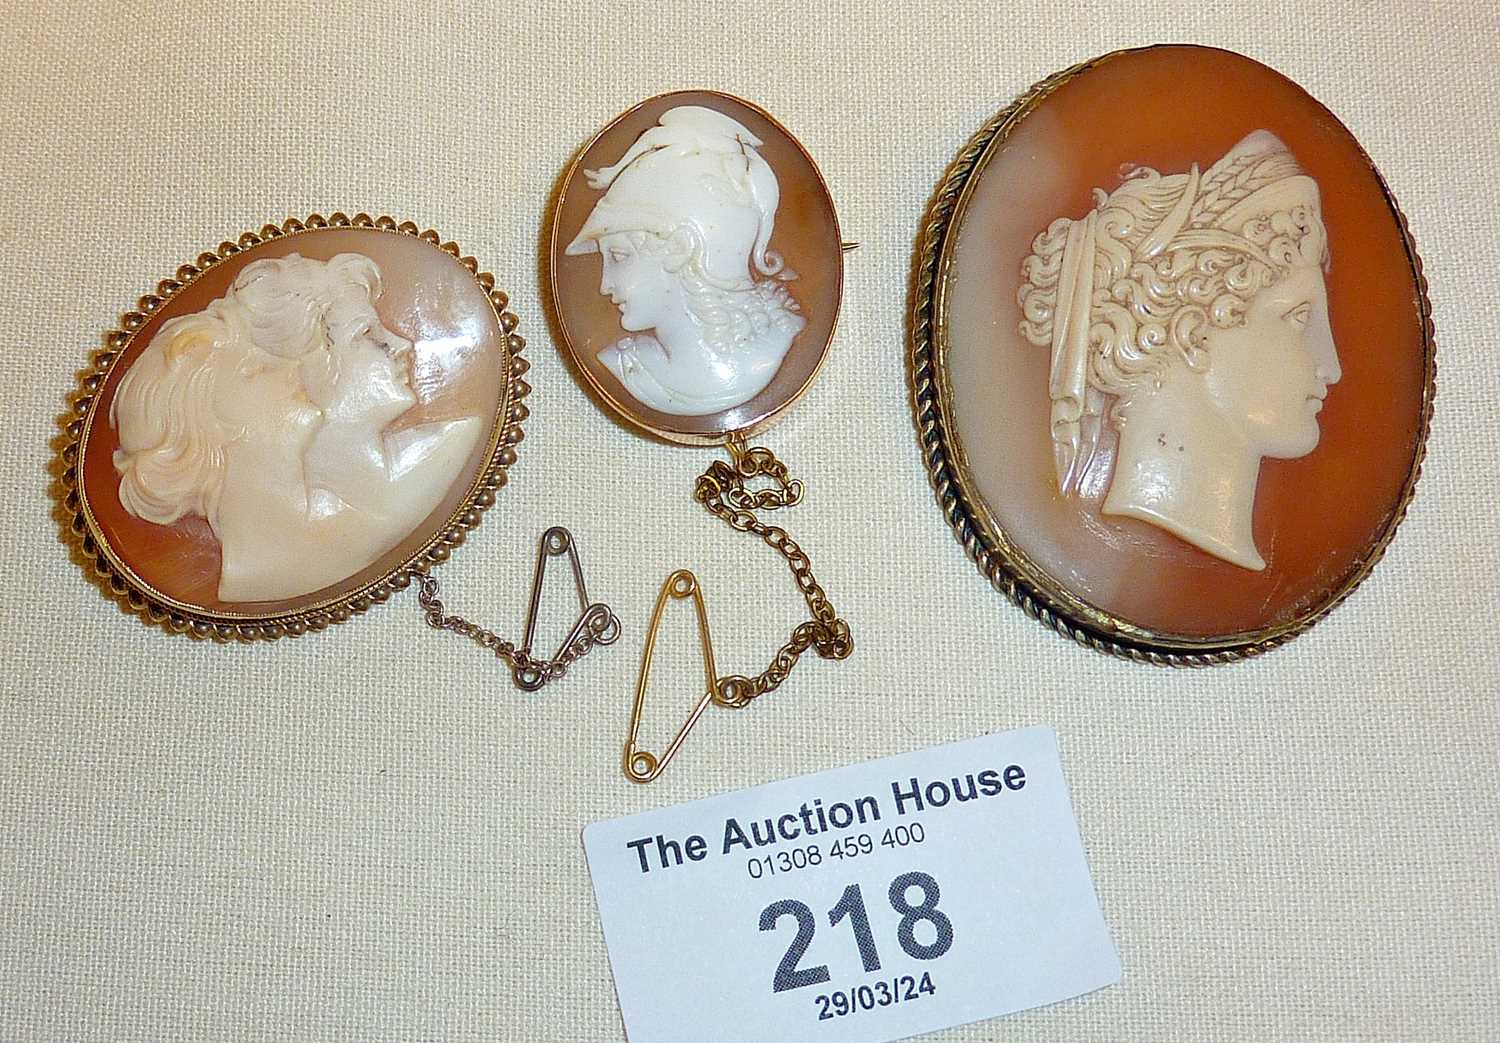 Three antique shell cameo brooches, largest finely carved classical lady profile - approx. 5cm high, - Image 5 of 6